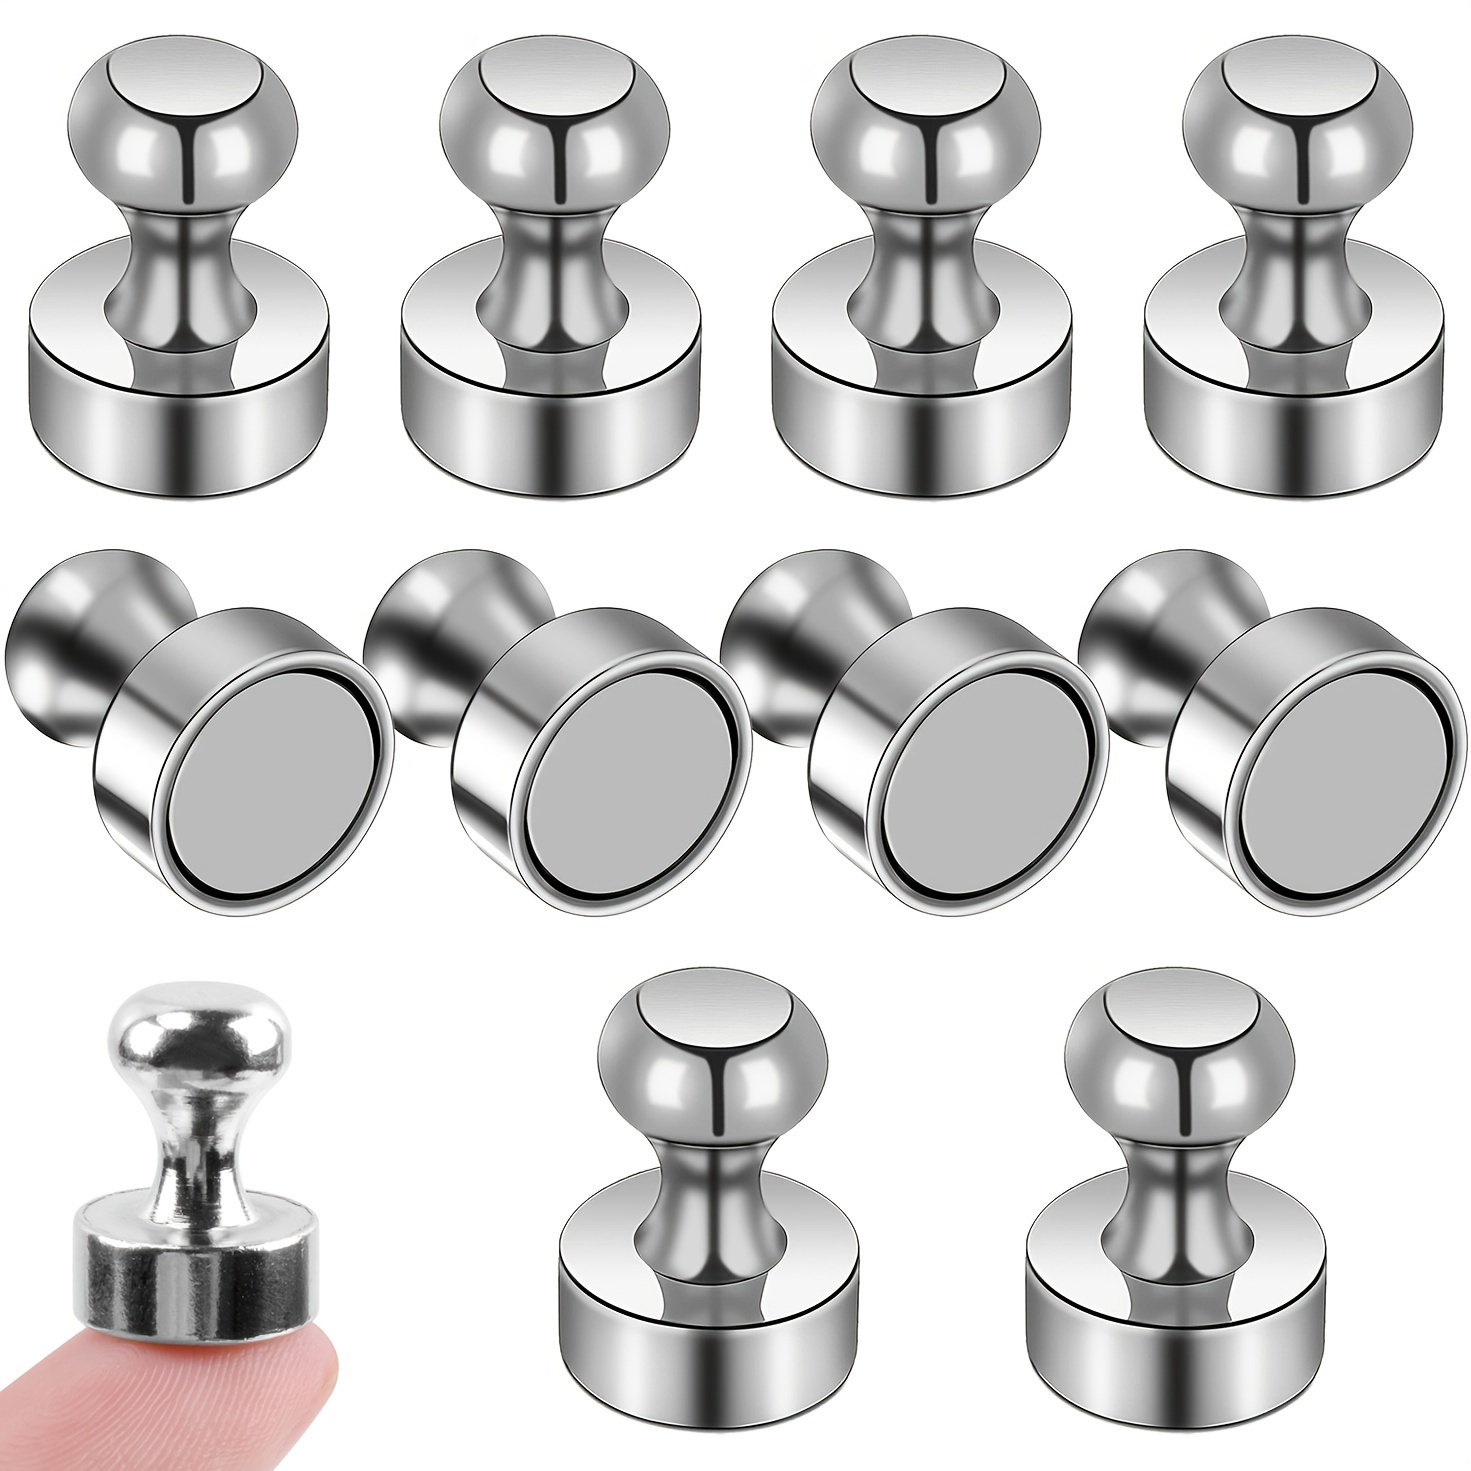 50 PCS Small Magnets 8x2mm, Neodymium Magnet Round, Strong Magnets, Fridge  Magnets Adult for Whiteboard, Fridge, Home, Kitchen, Office